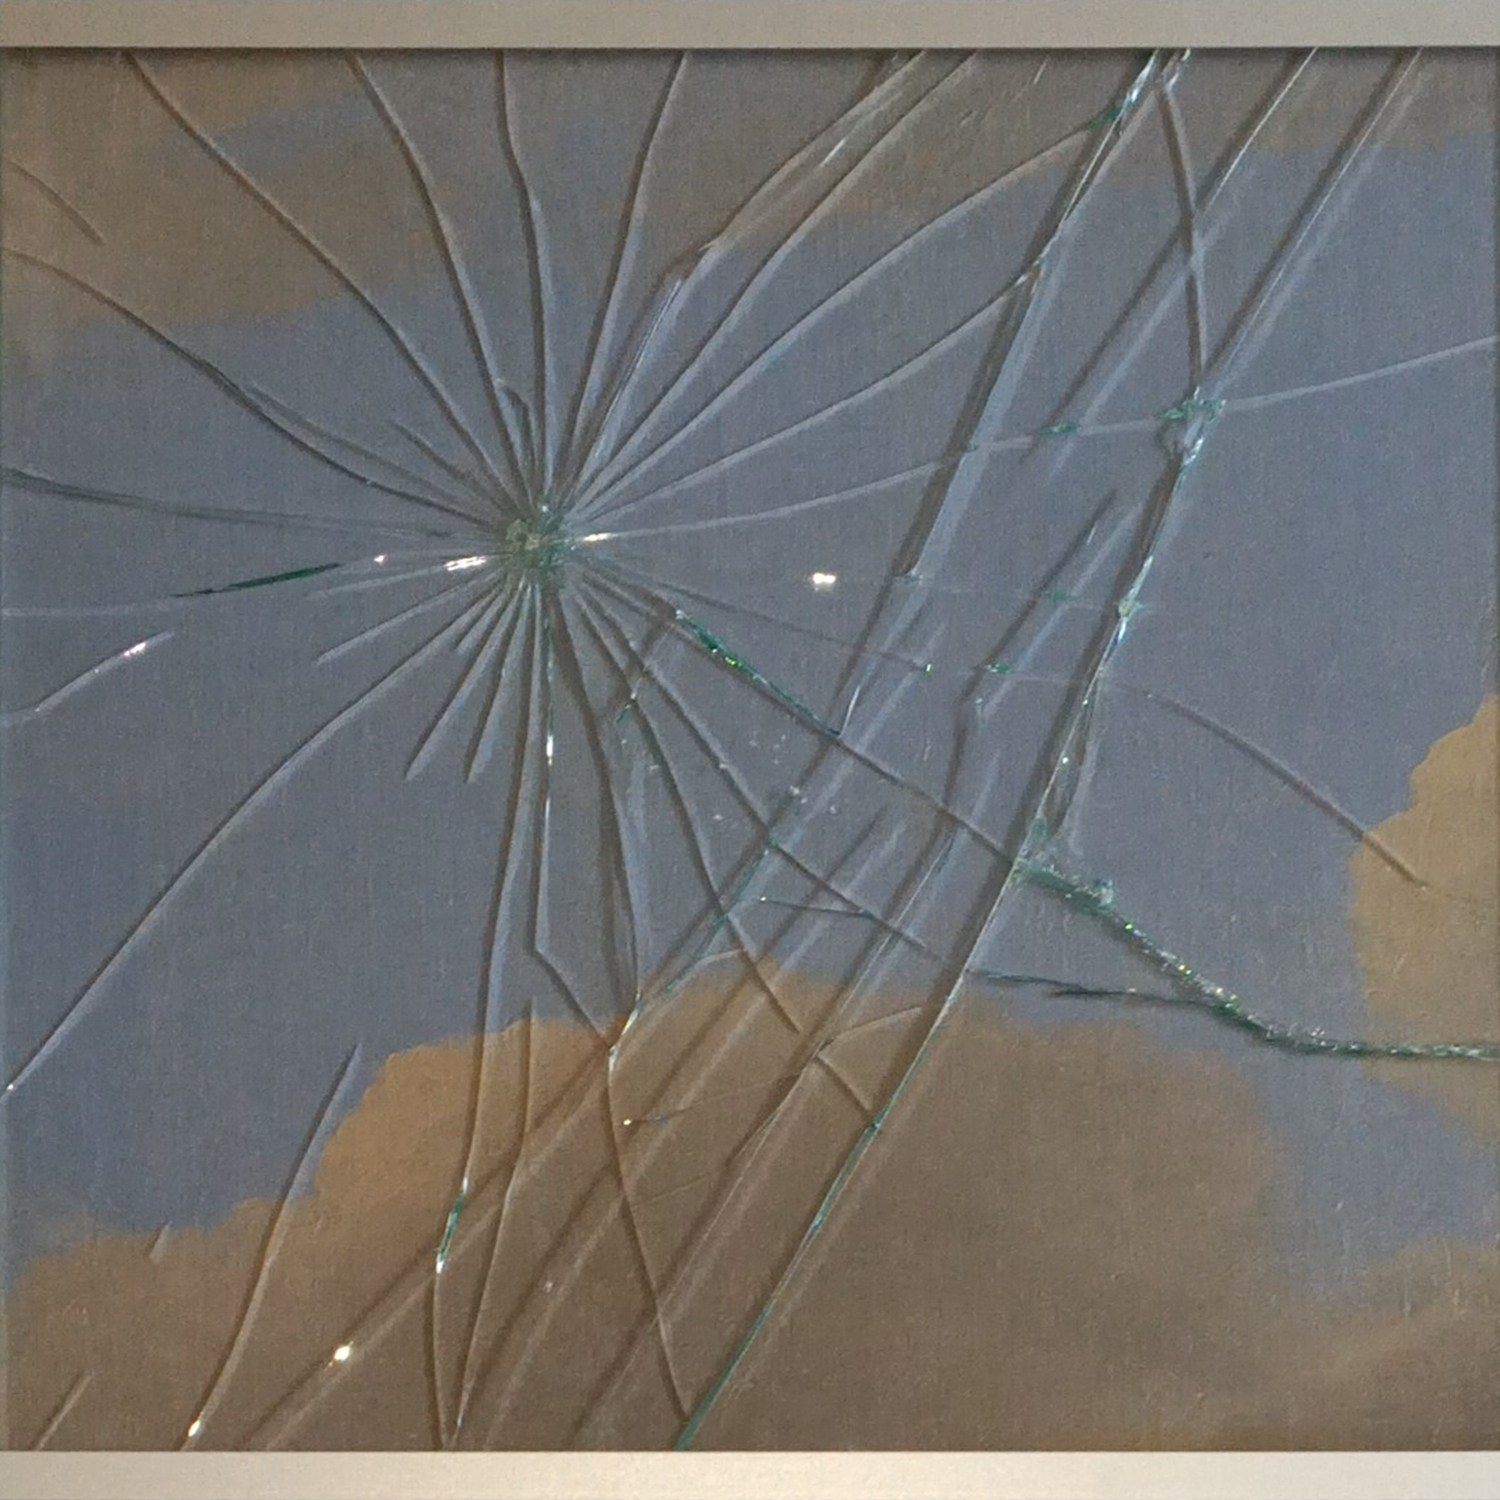 Shattered glass: transgressing the prohibitions imposed by the symbols of power